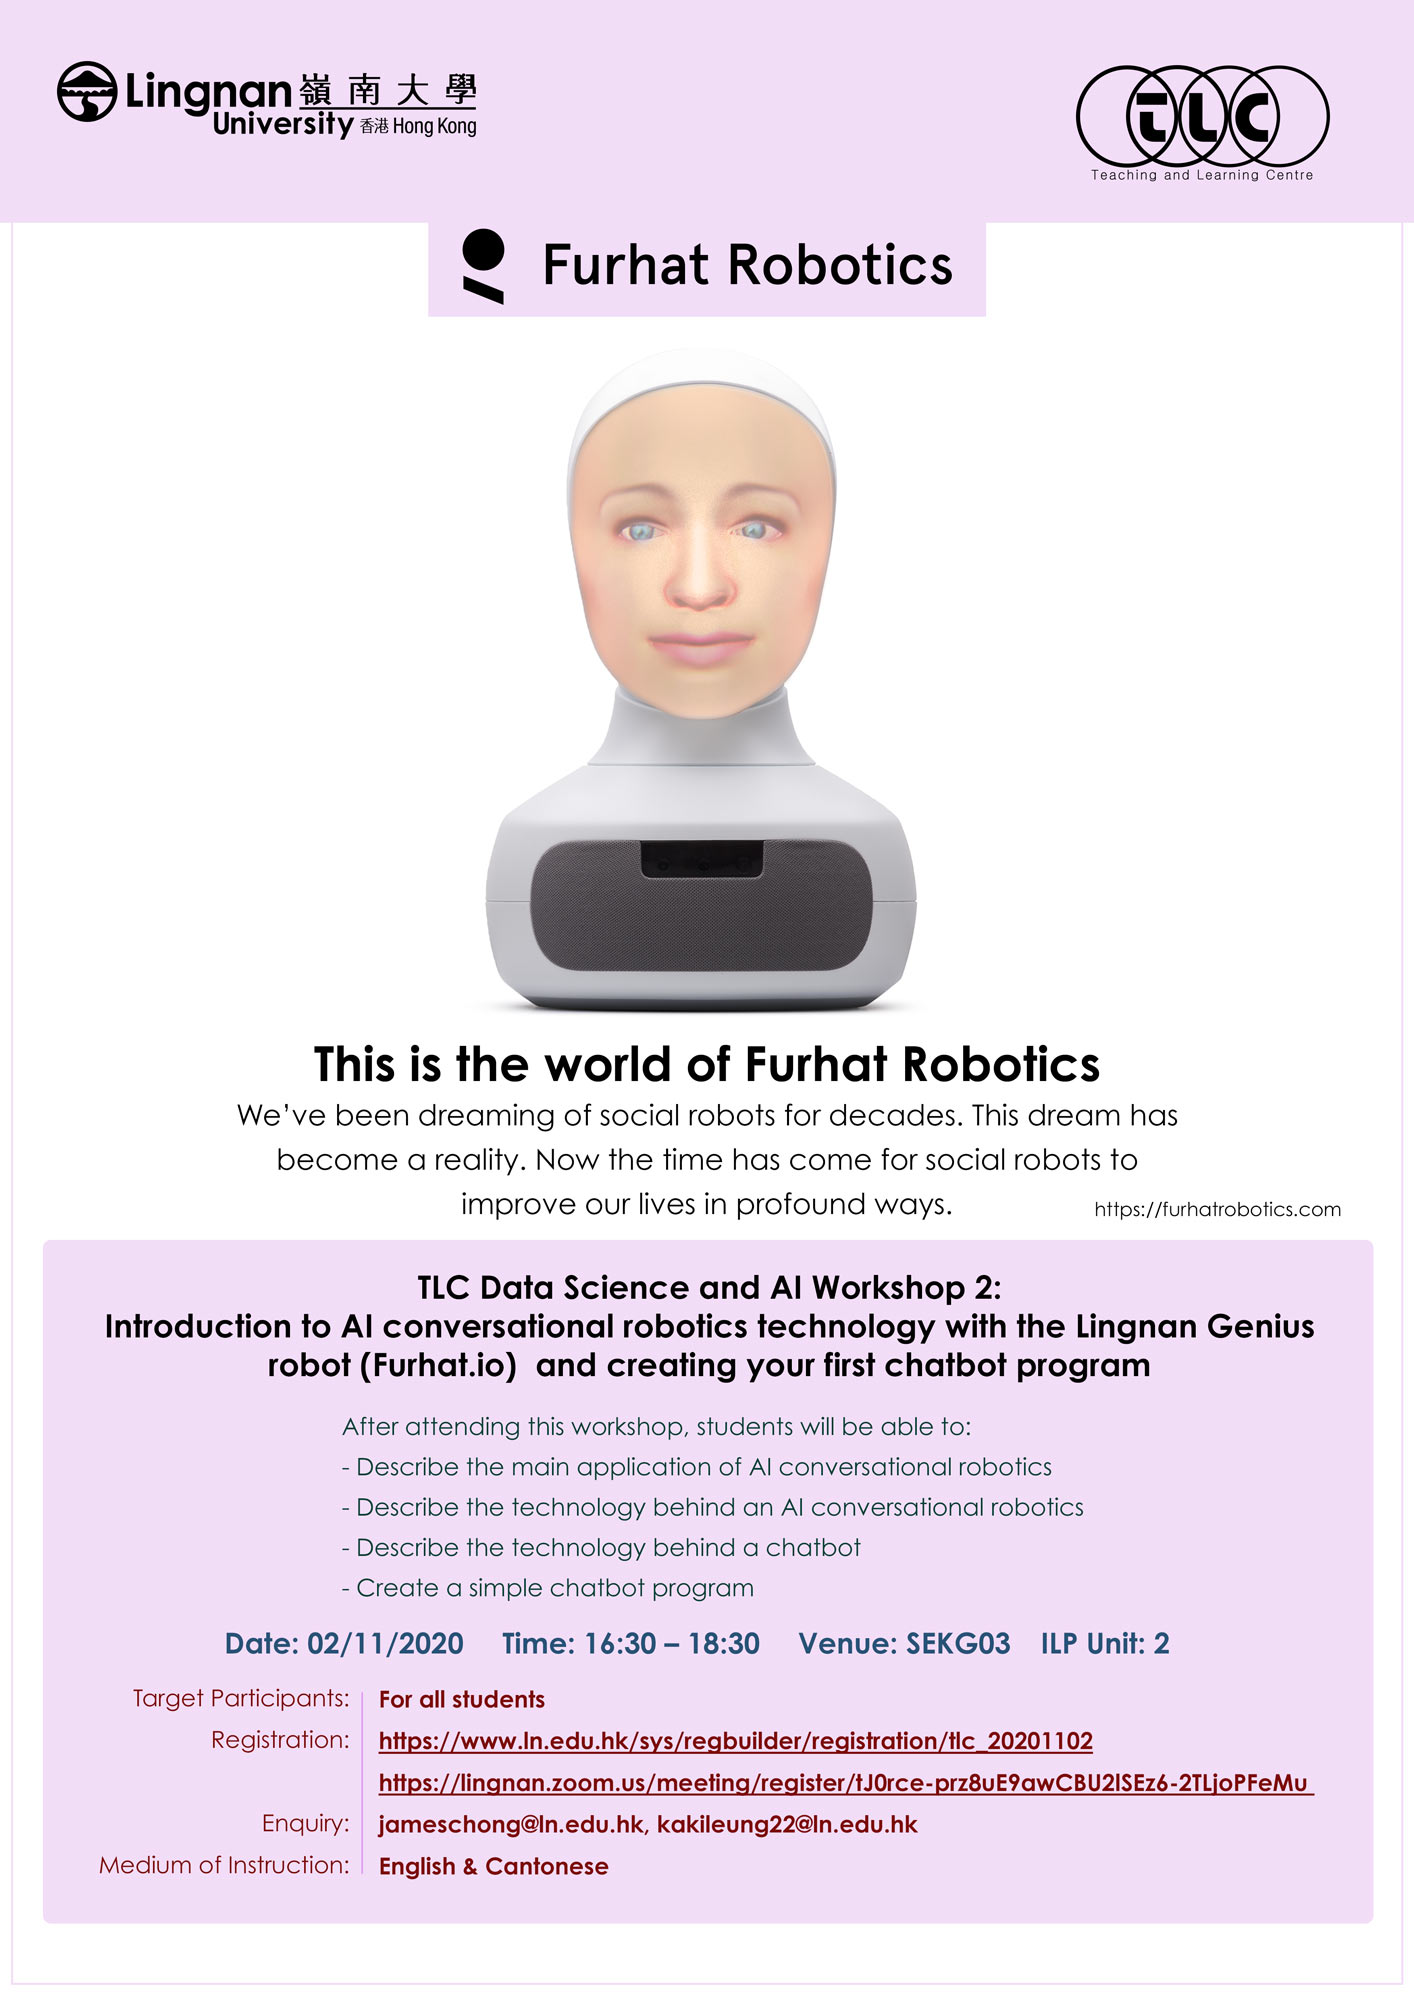 Introduction to AI Conversational Robotics Technology with the Lingnan Genius Robot (Furhat.io) and Creating your First Chatbot Program